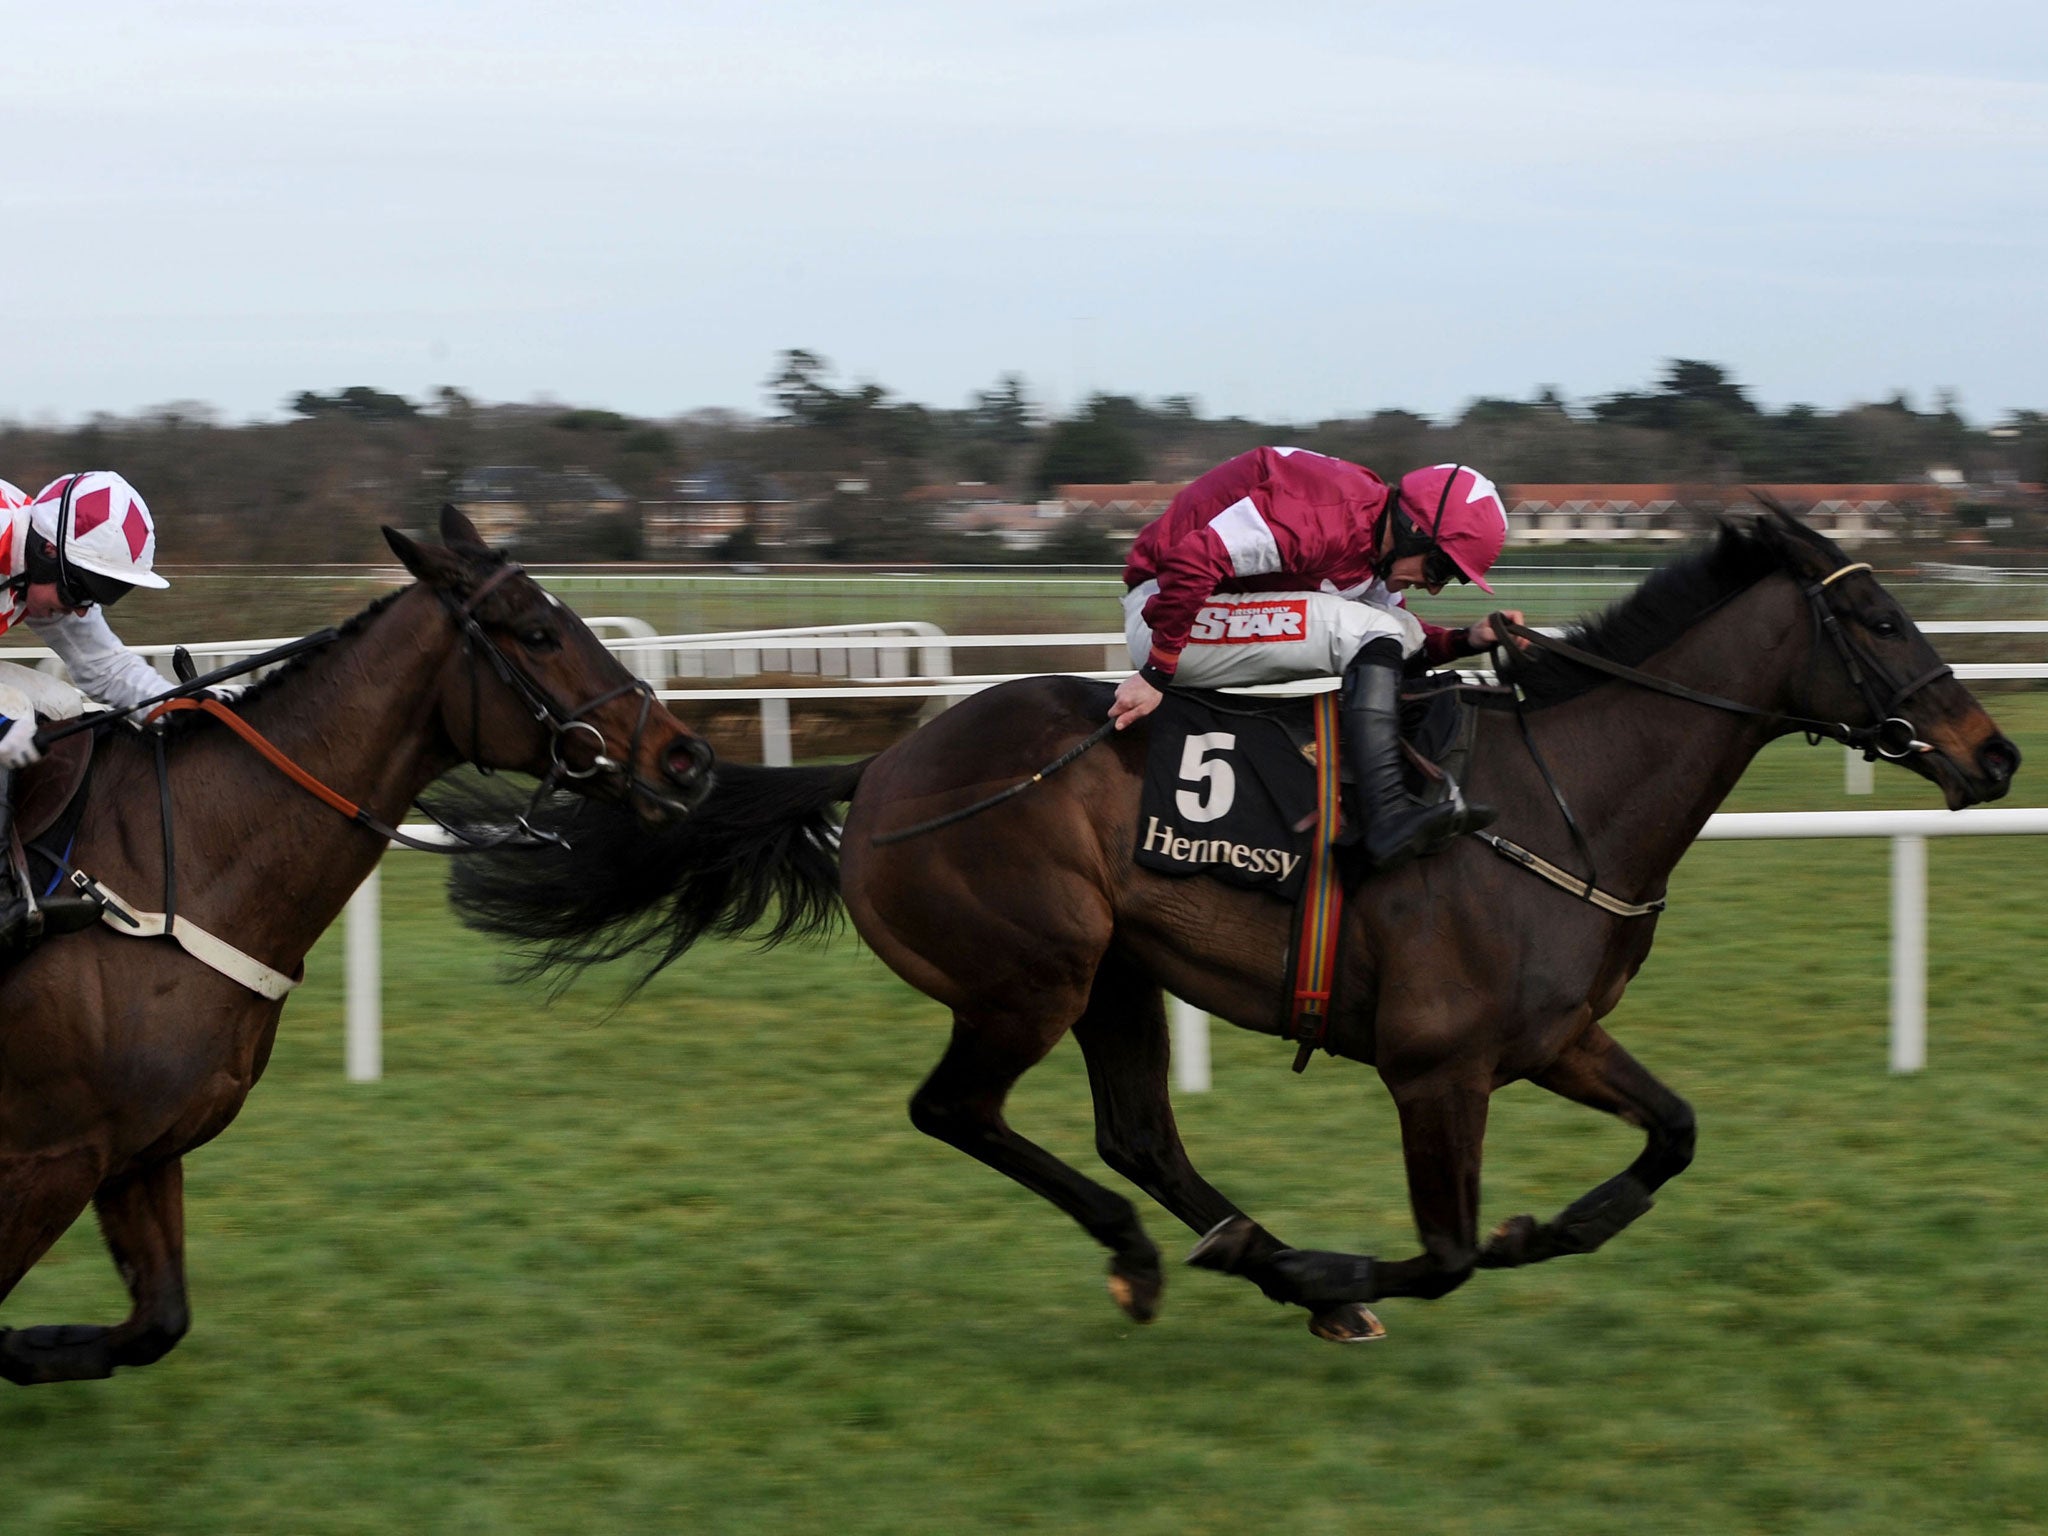 Gold standard: Sir Des Champs (right), ridden by Davy Russell, races clear of Andrew Lynch on Flemenstar to win the Hennessy Gold Cup at Leopardstown